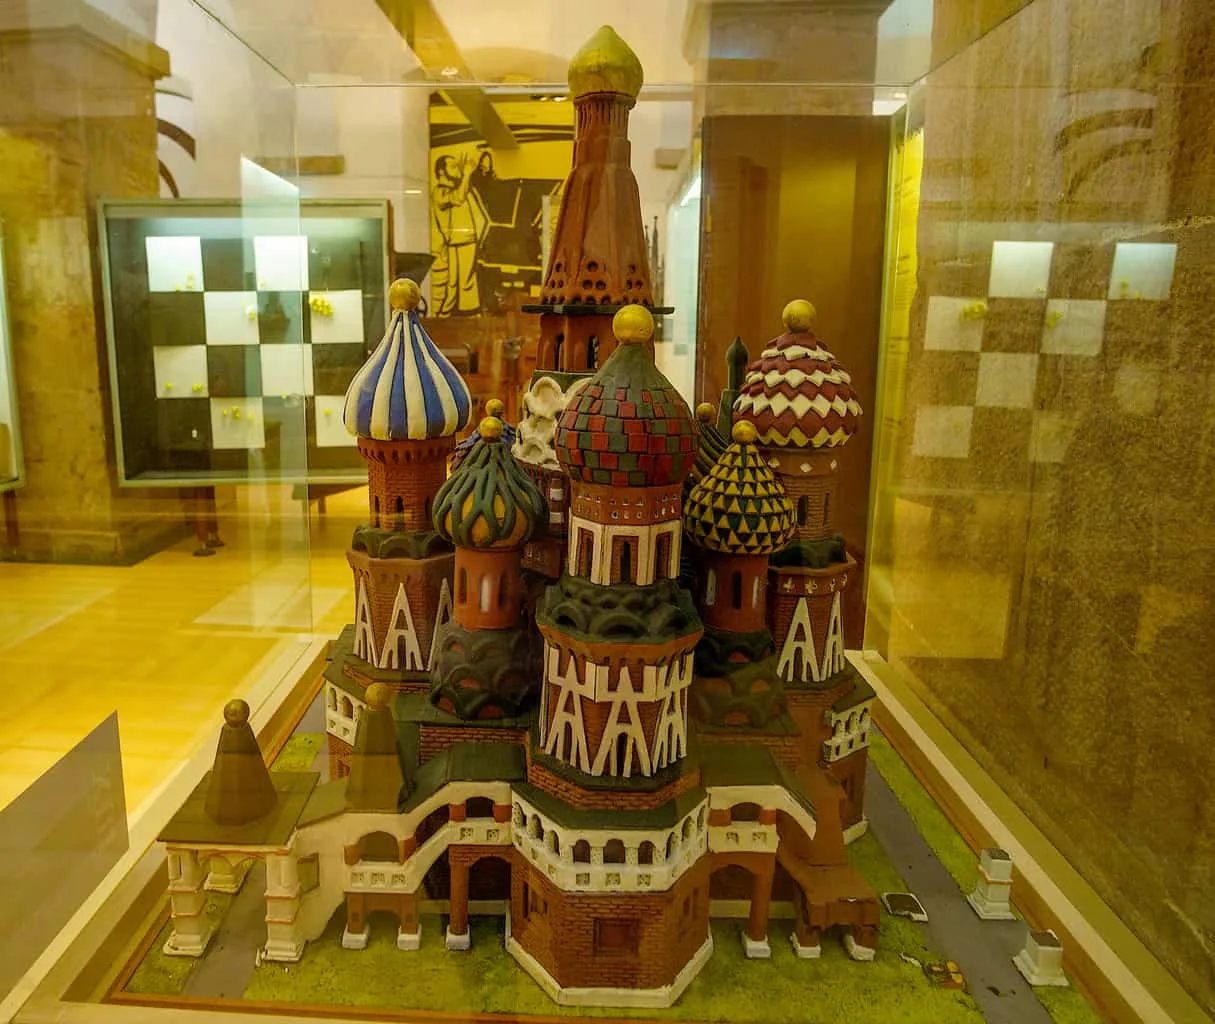 A chocolate sculpture of Moscow's famous, St. Basil's Cathedral is proudly displayed inside of Barcelona's chocolate museum.